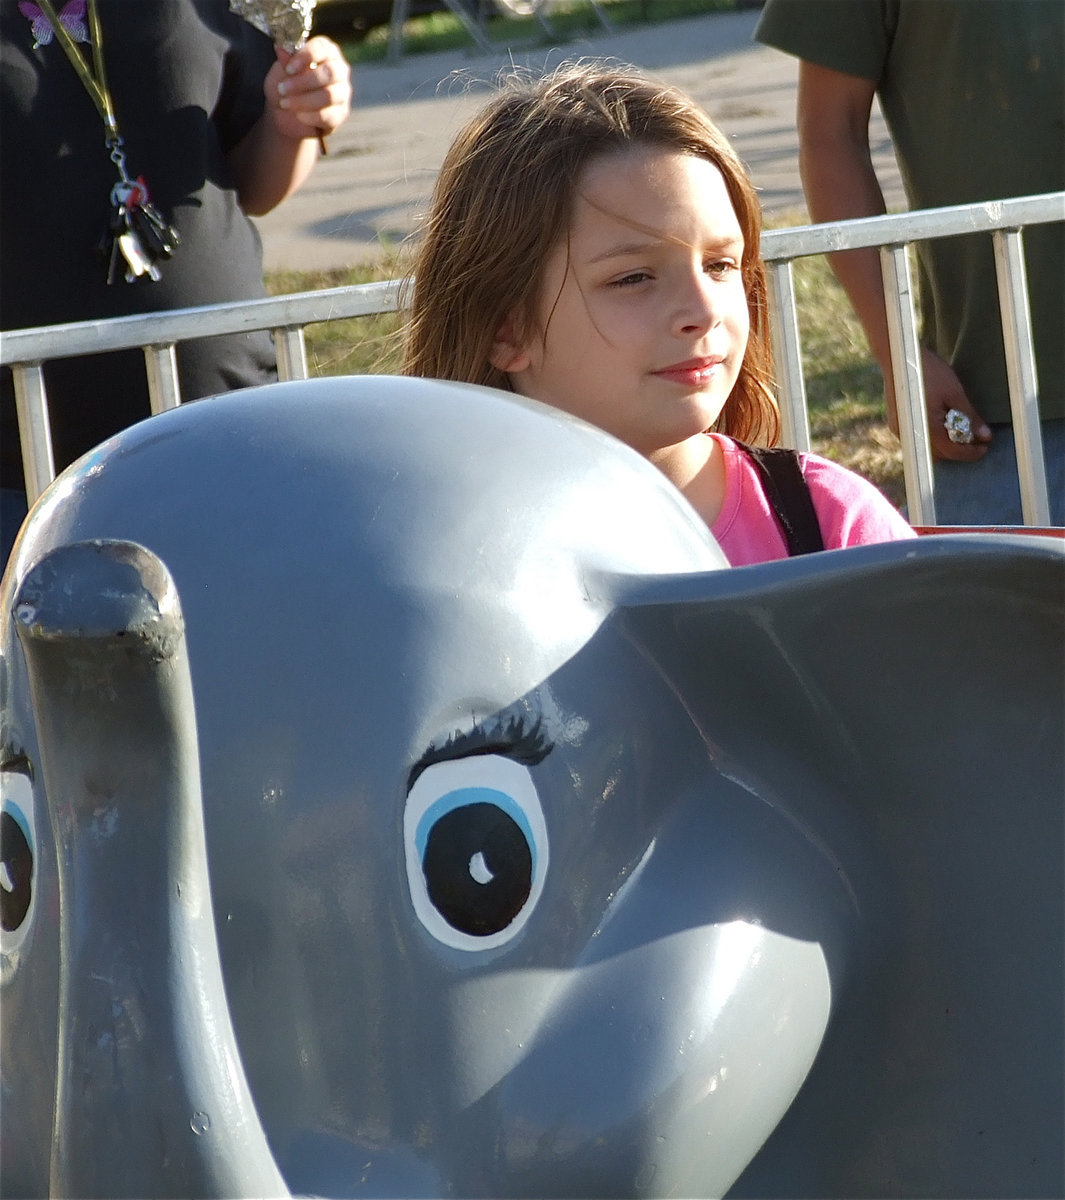 Image: Evie Hernandez takes her turn on the elephant ride.